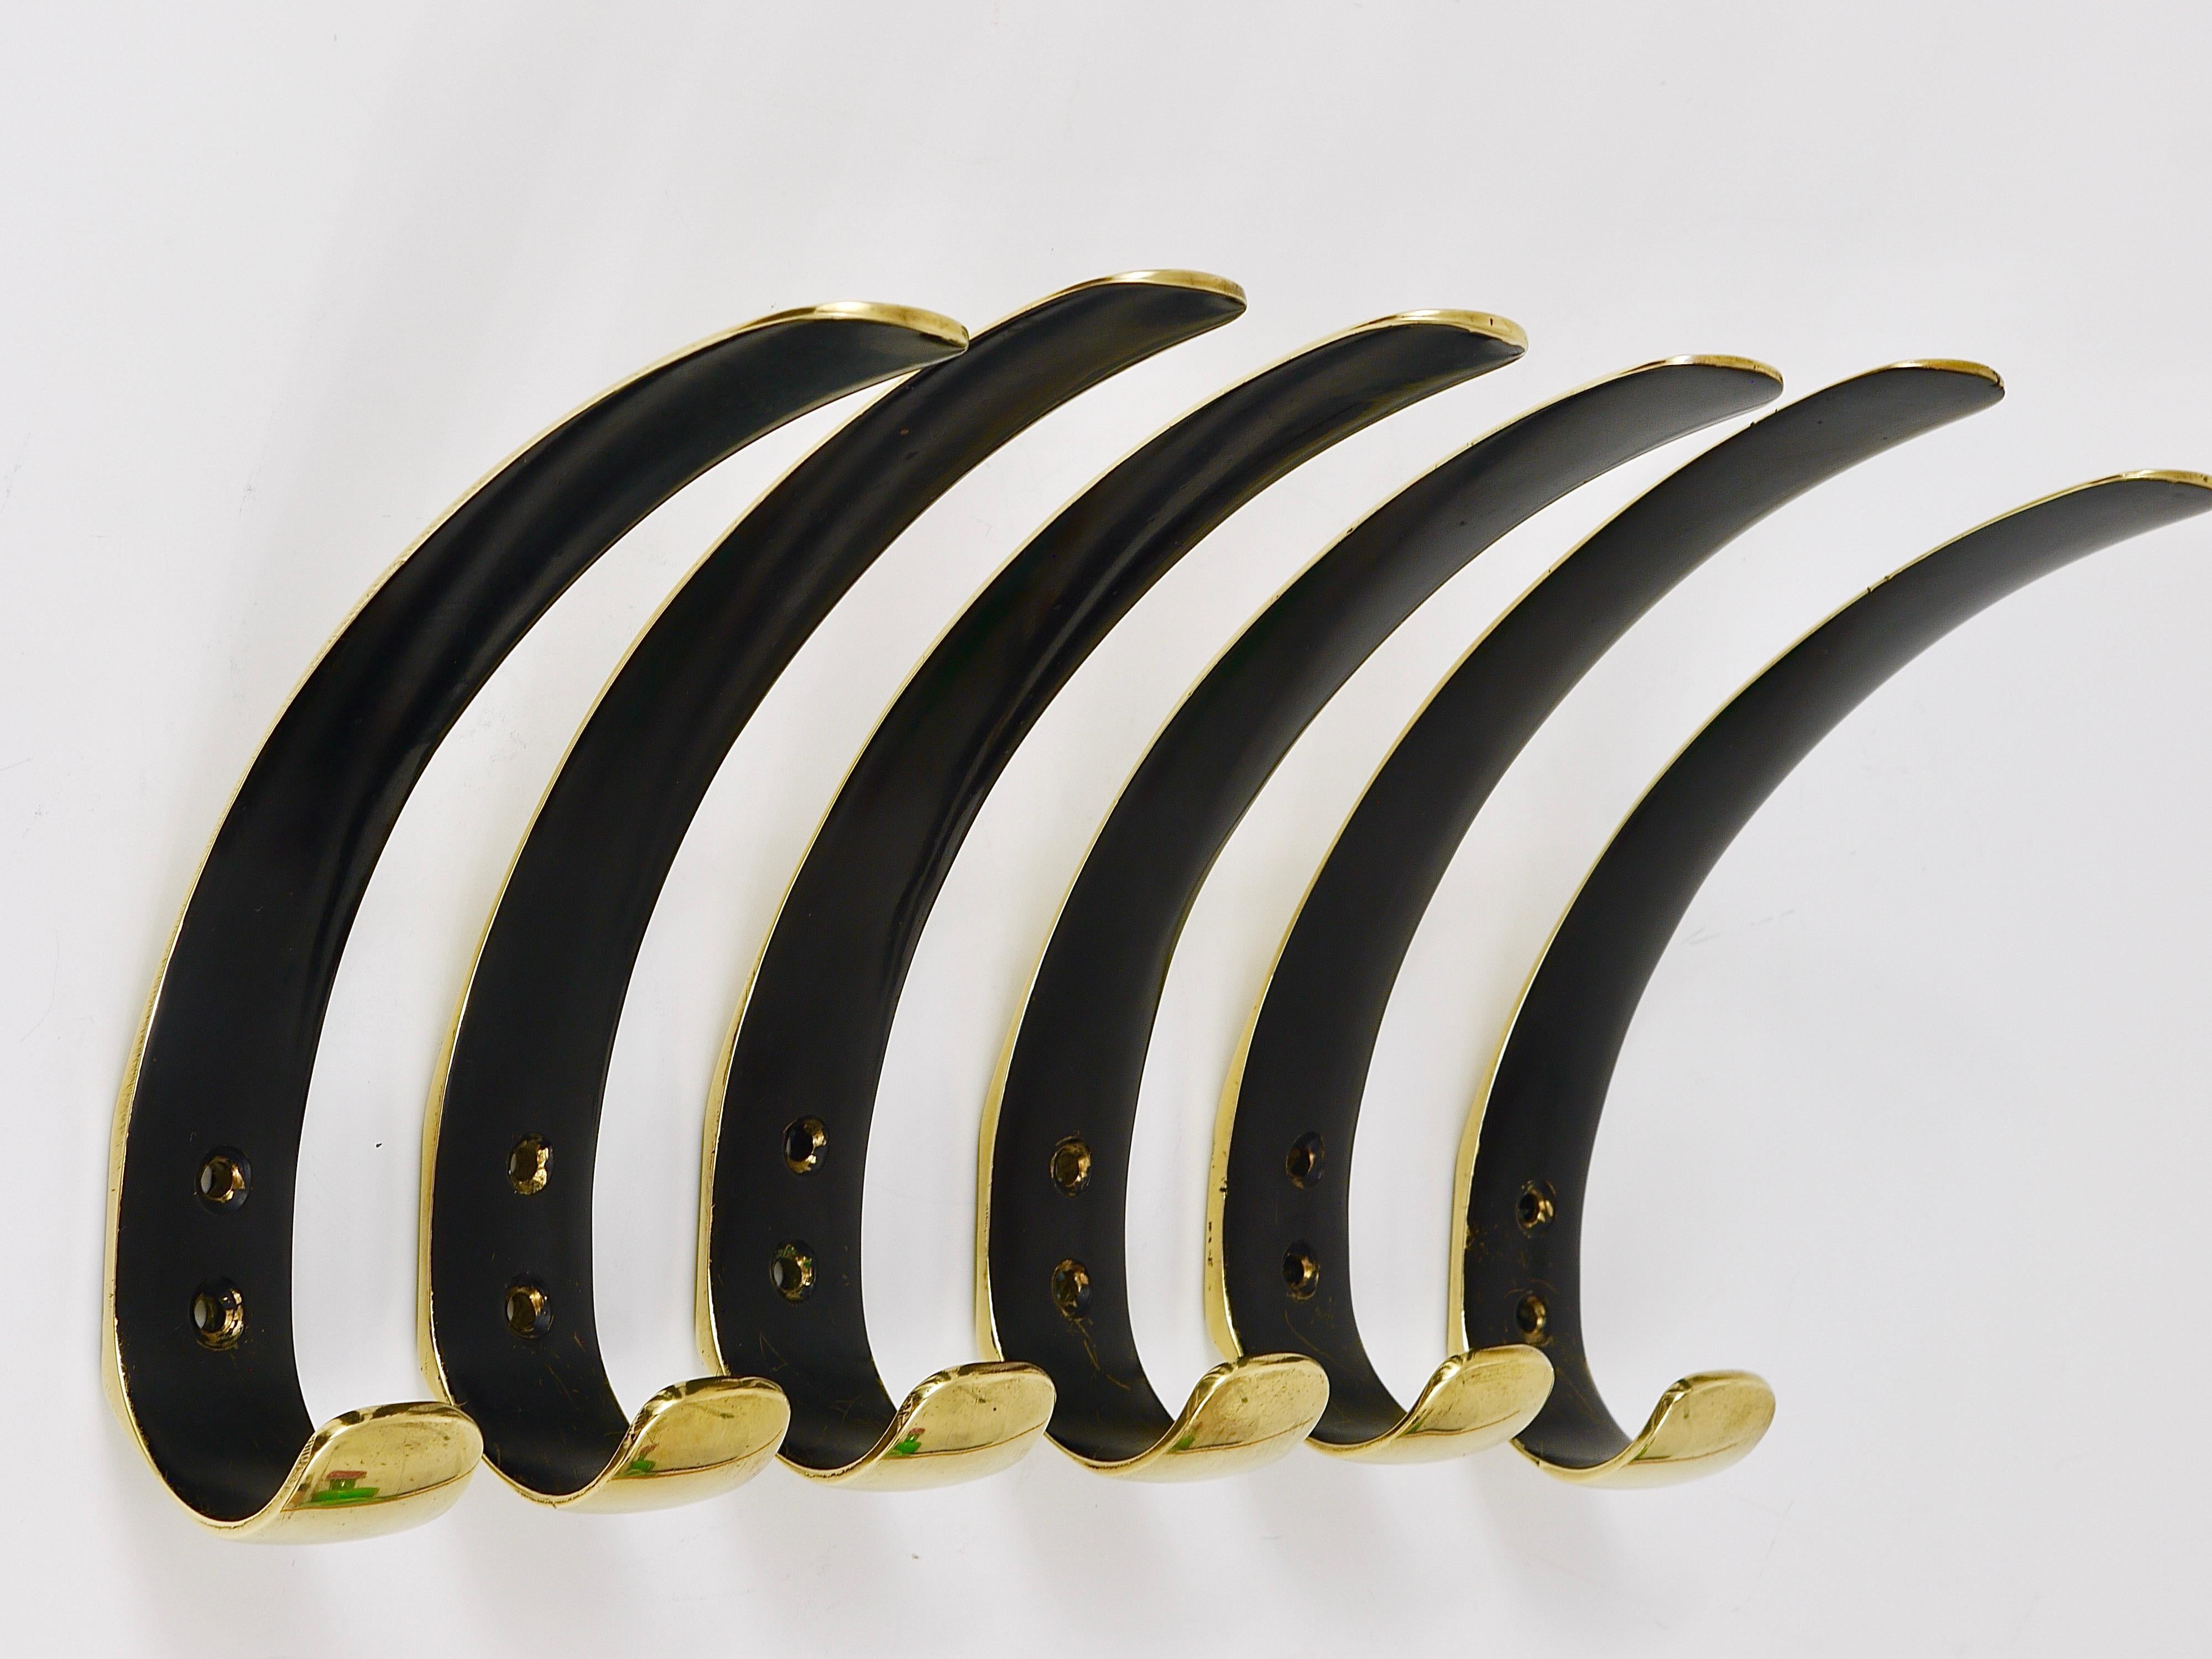 Up to Six Mid-Century Brass Wall Coat Hooks by Herta Baller, Austria, 1950s For Sale 7